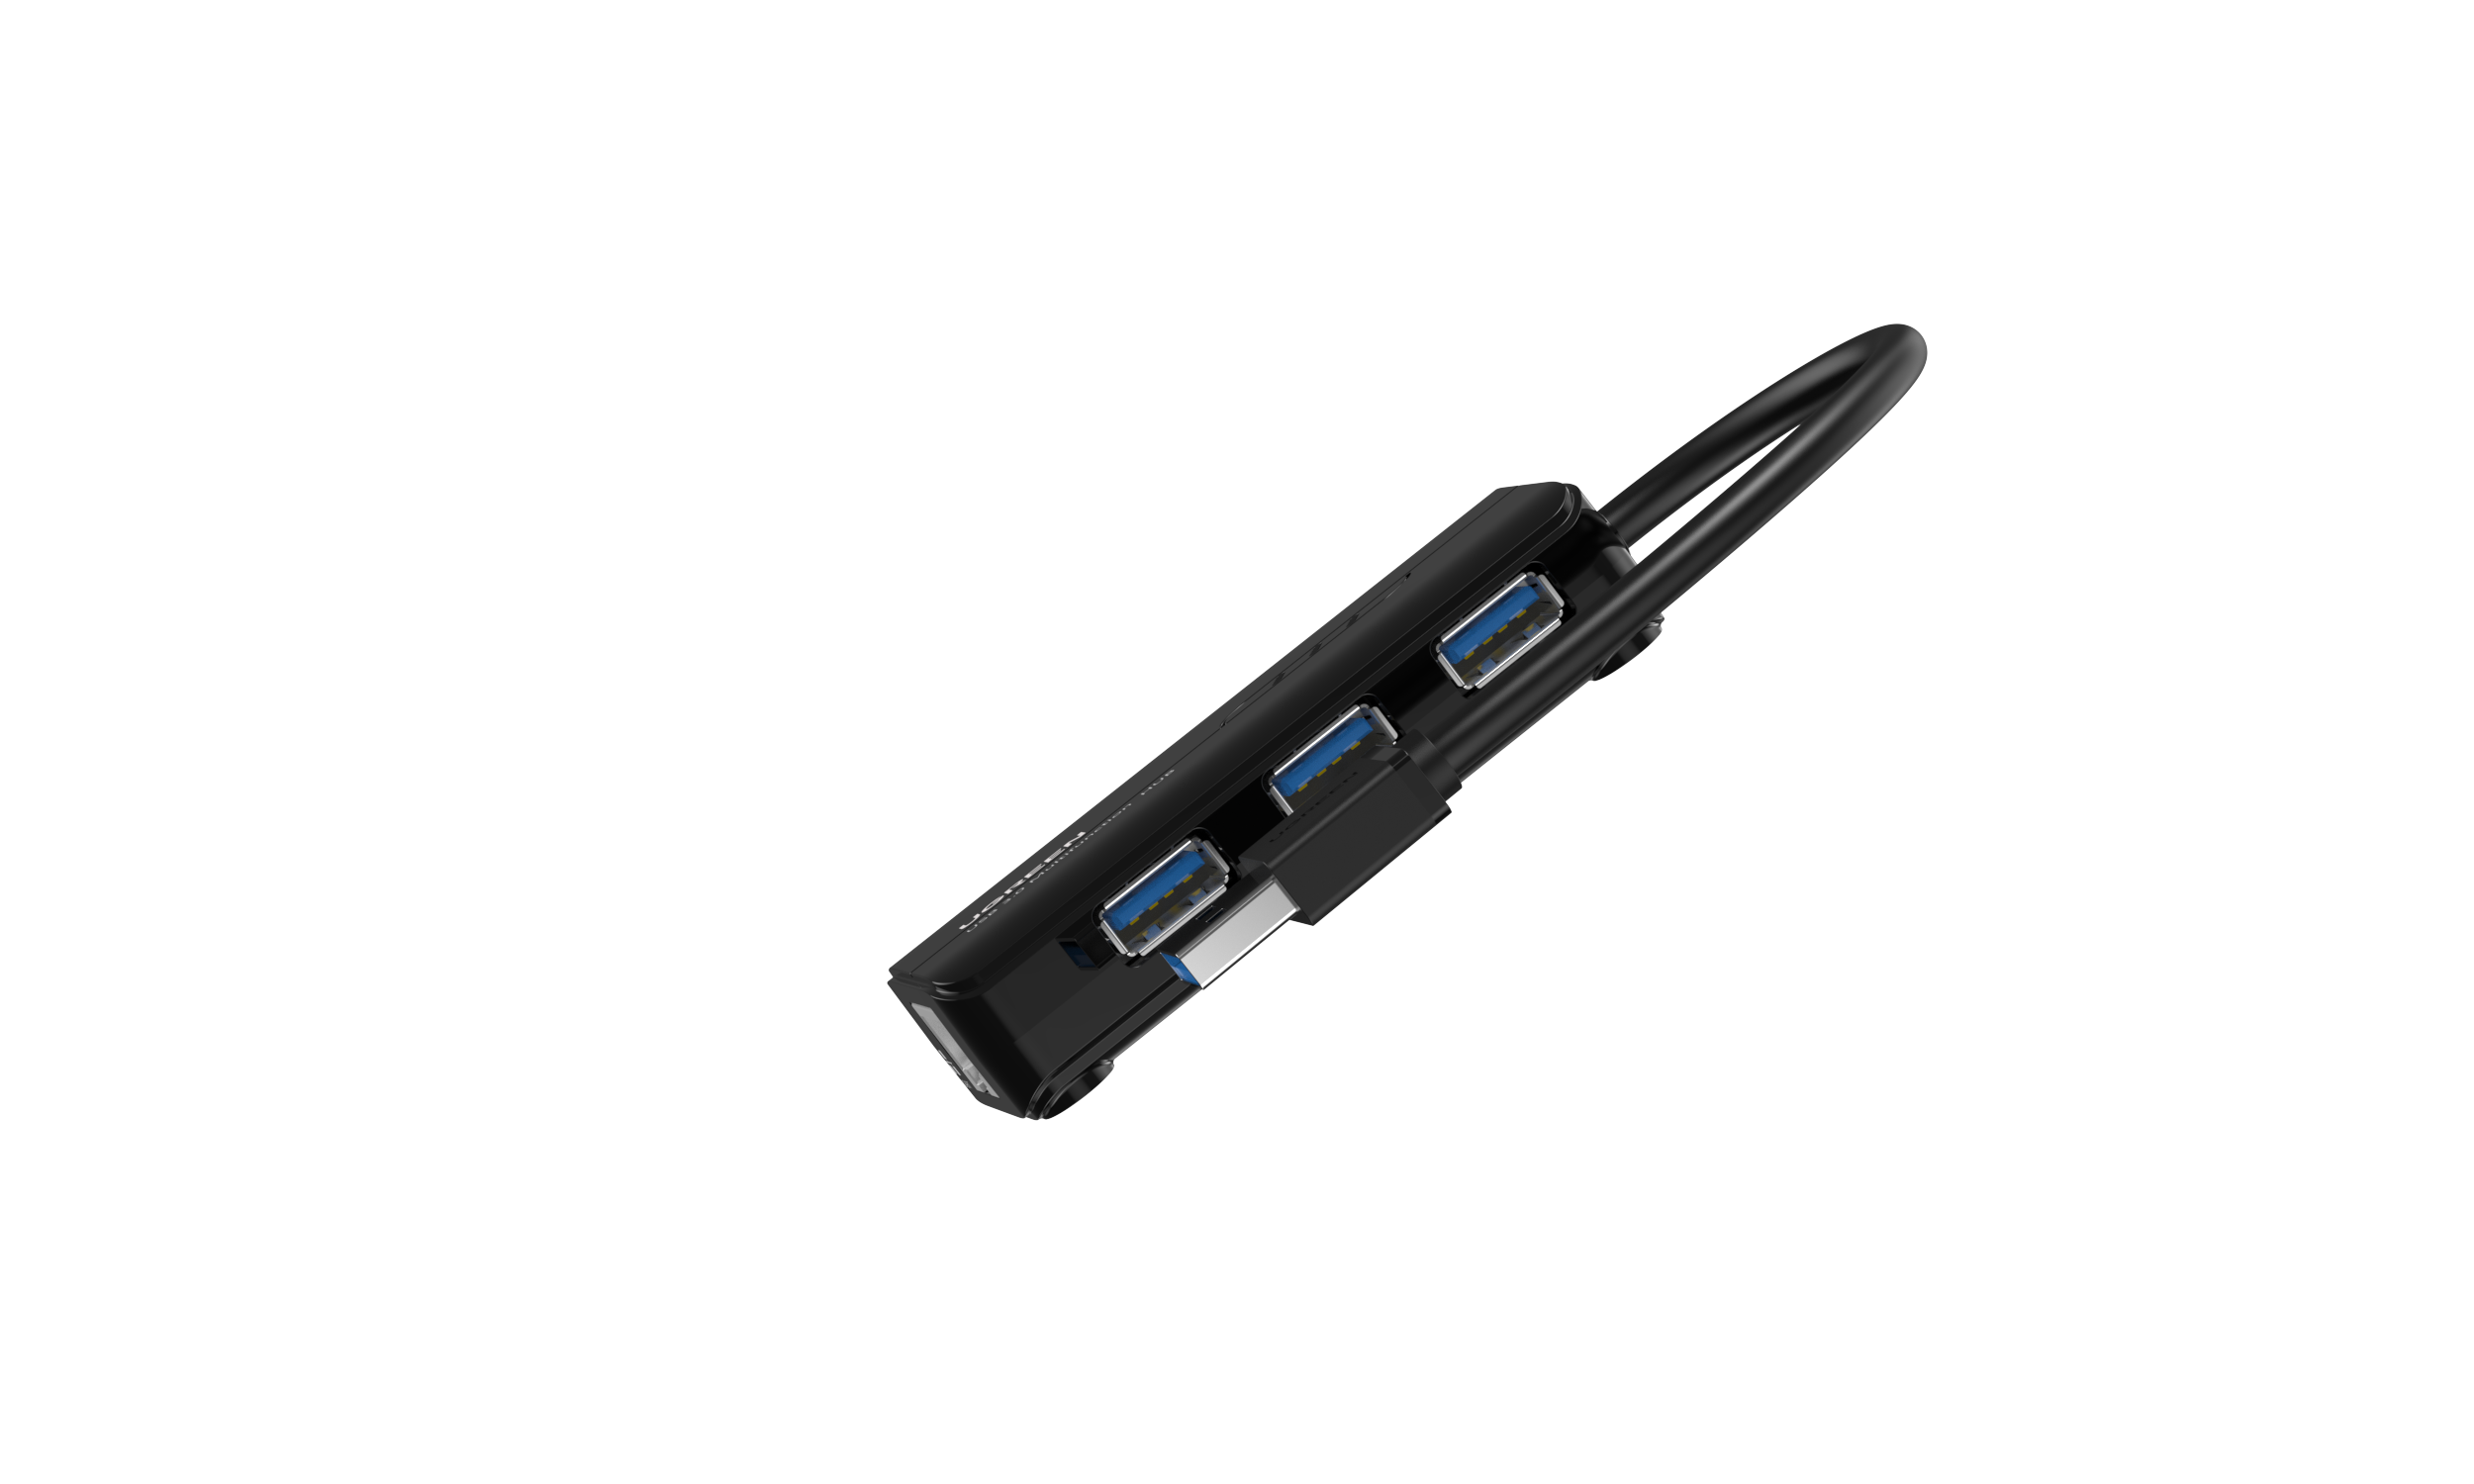 UGREEN USB Hub with 4 USB 3.0 Ports, Powered USB Splitter with 3ft Cable 